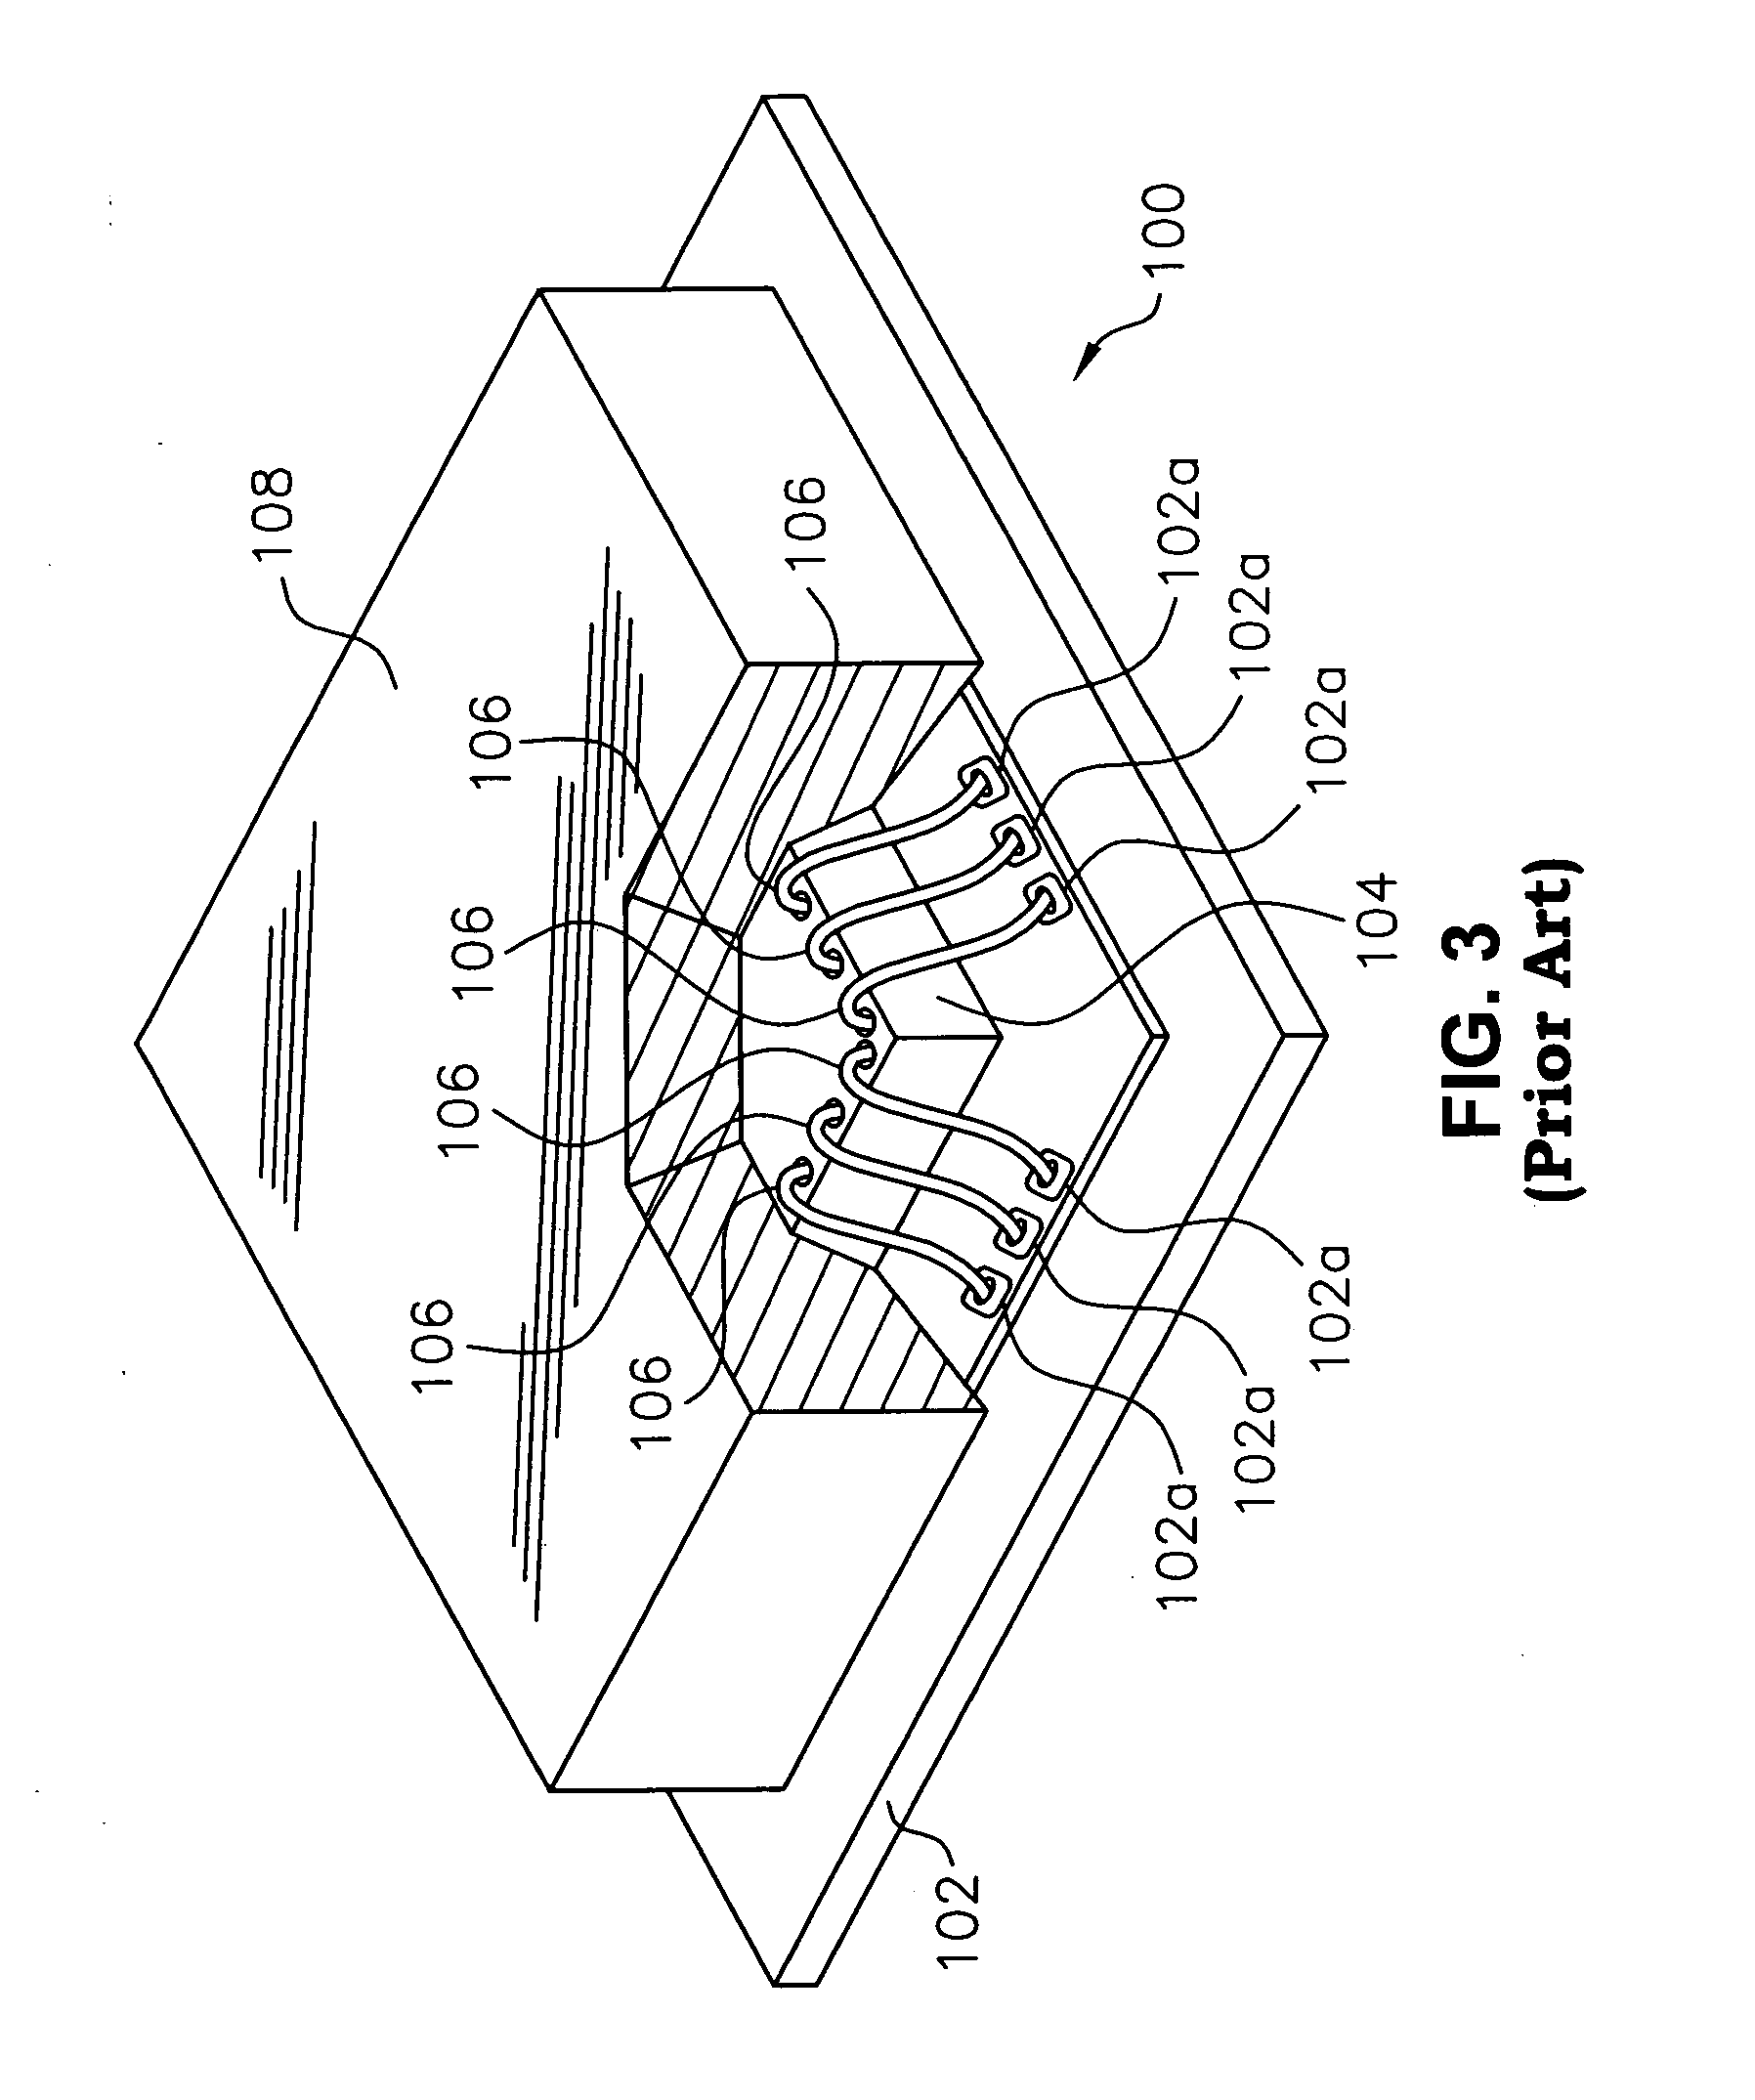 System for reducing or eliminating semiconductor device wire sweep